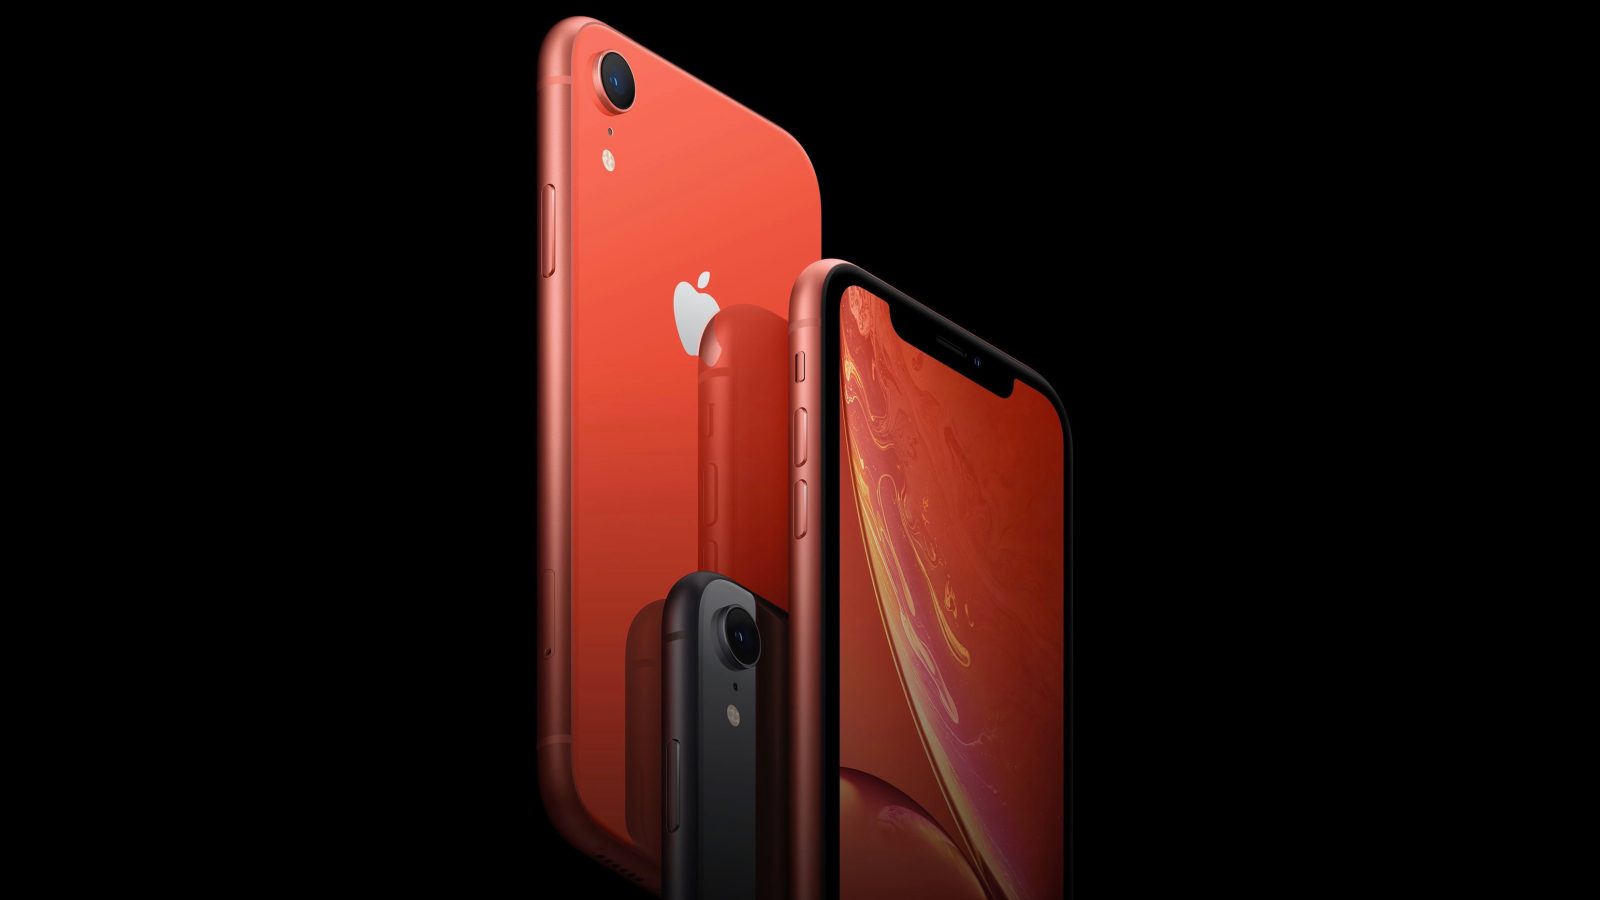 Download the iPhone XR wallpapers here